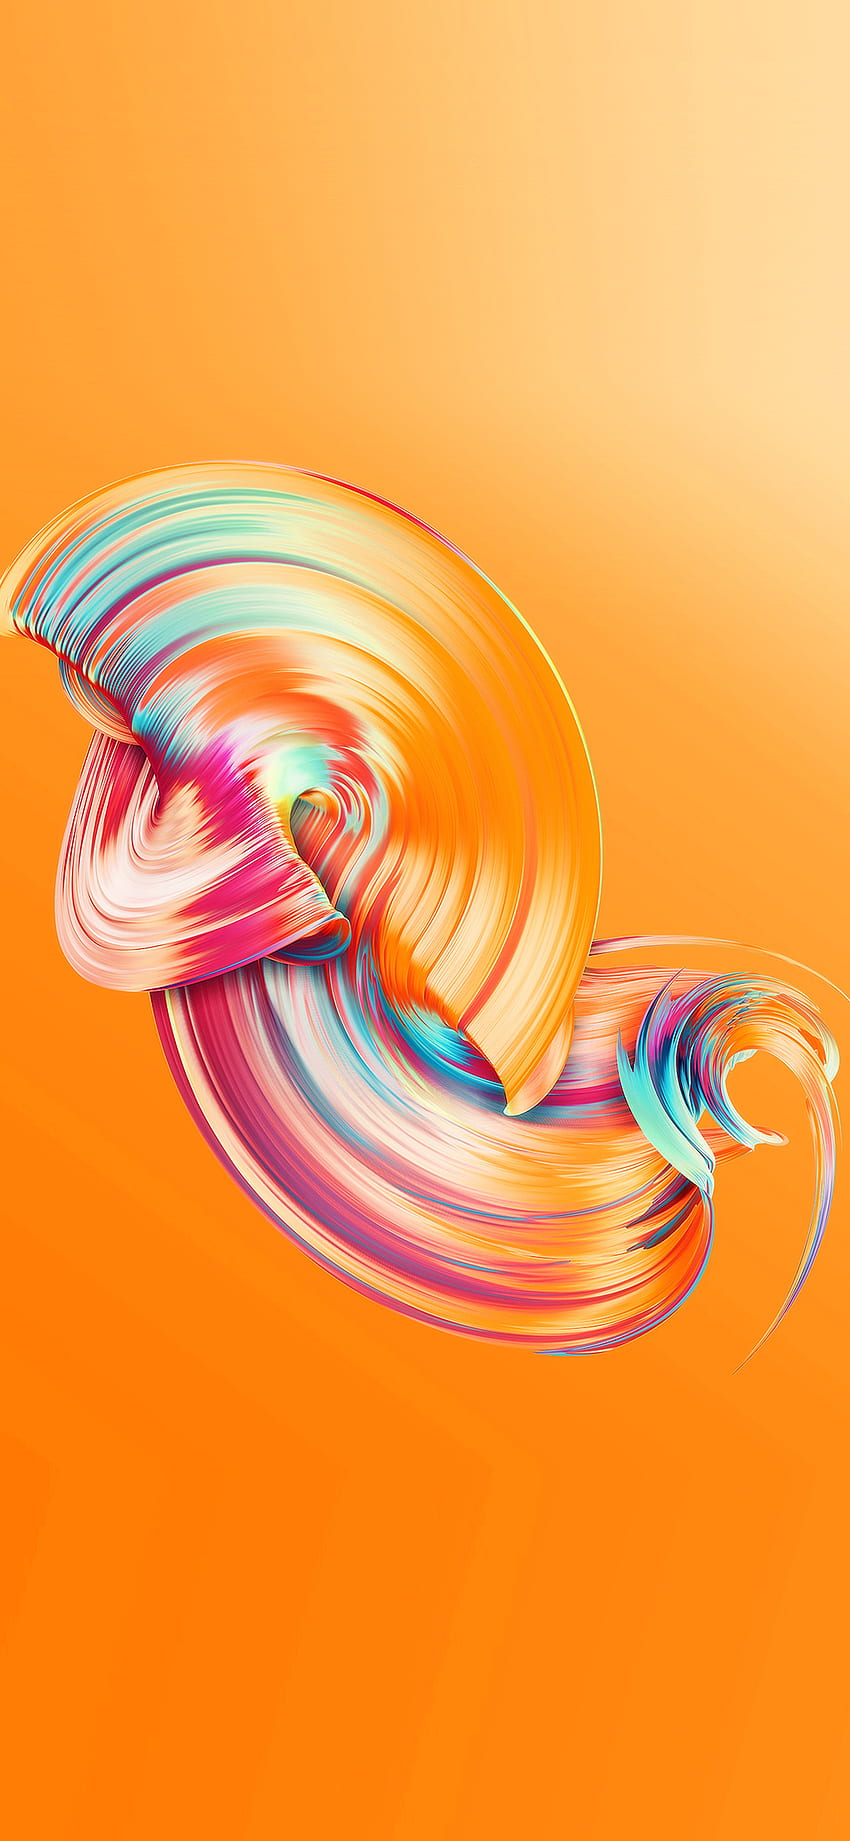 iPhone X . abstract lines color orange pattern background, Orange Design HD phone wallpaper